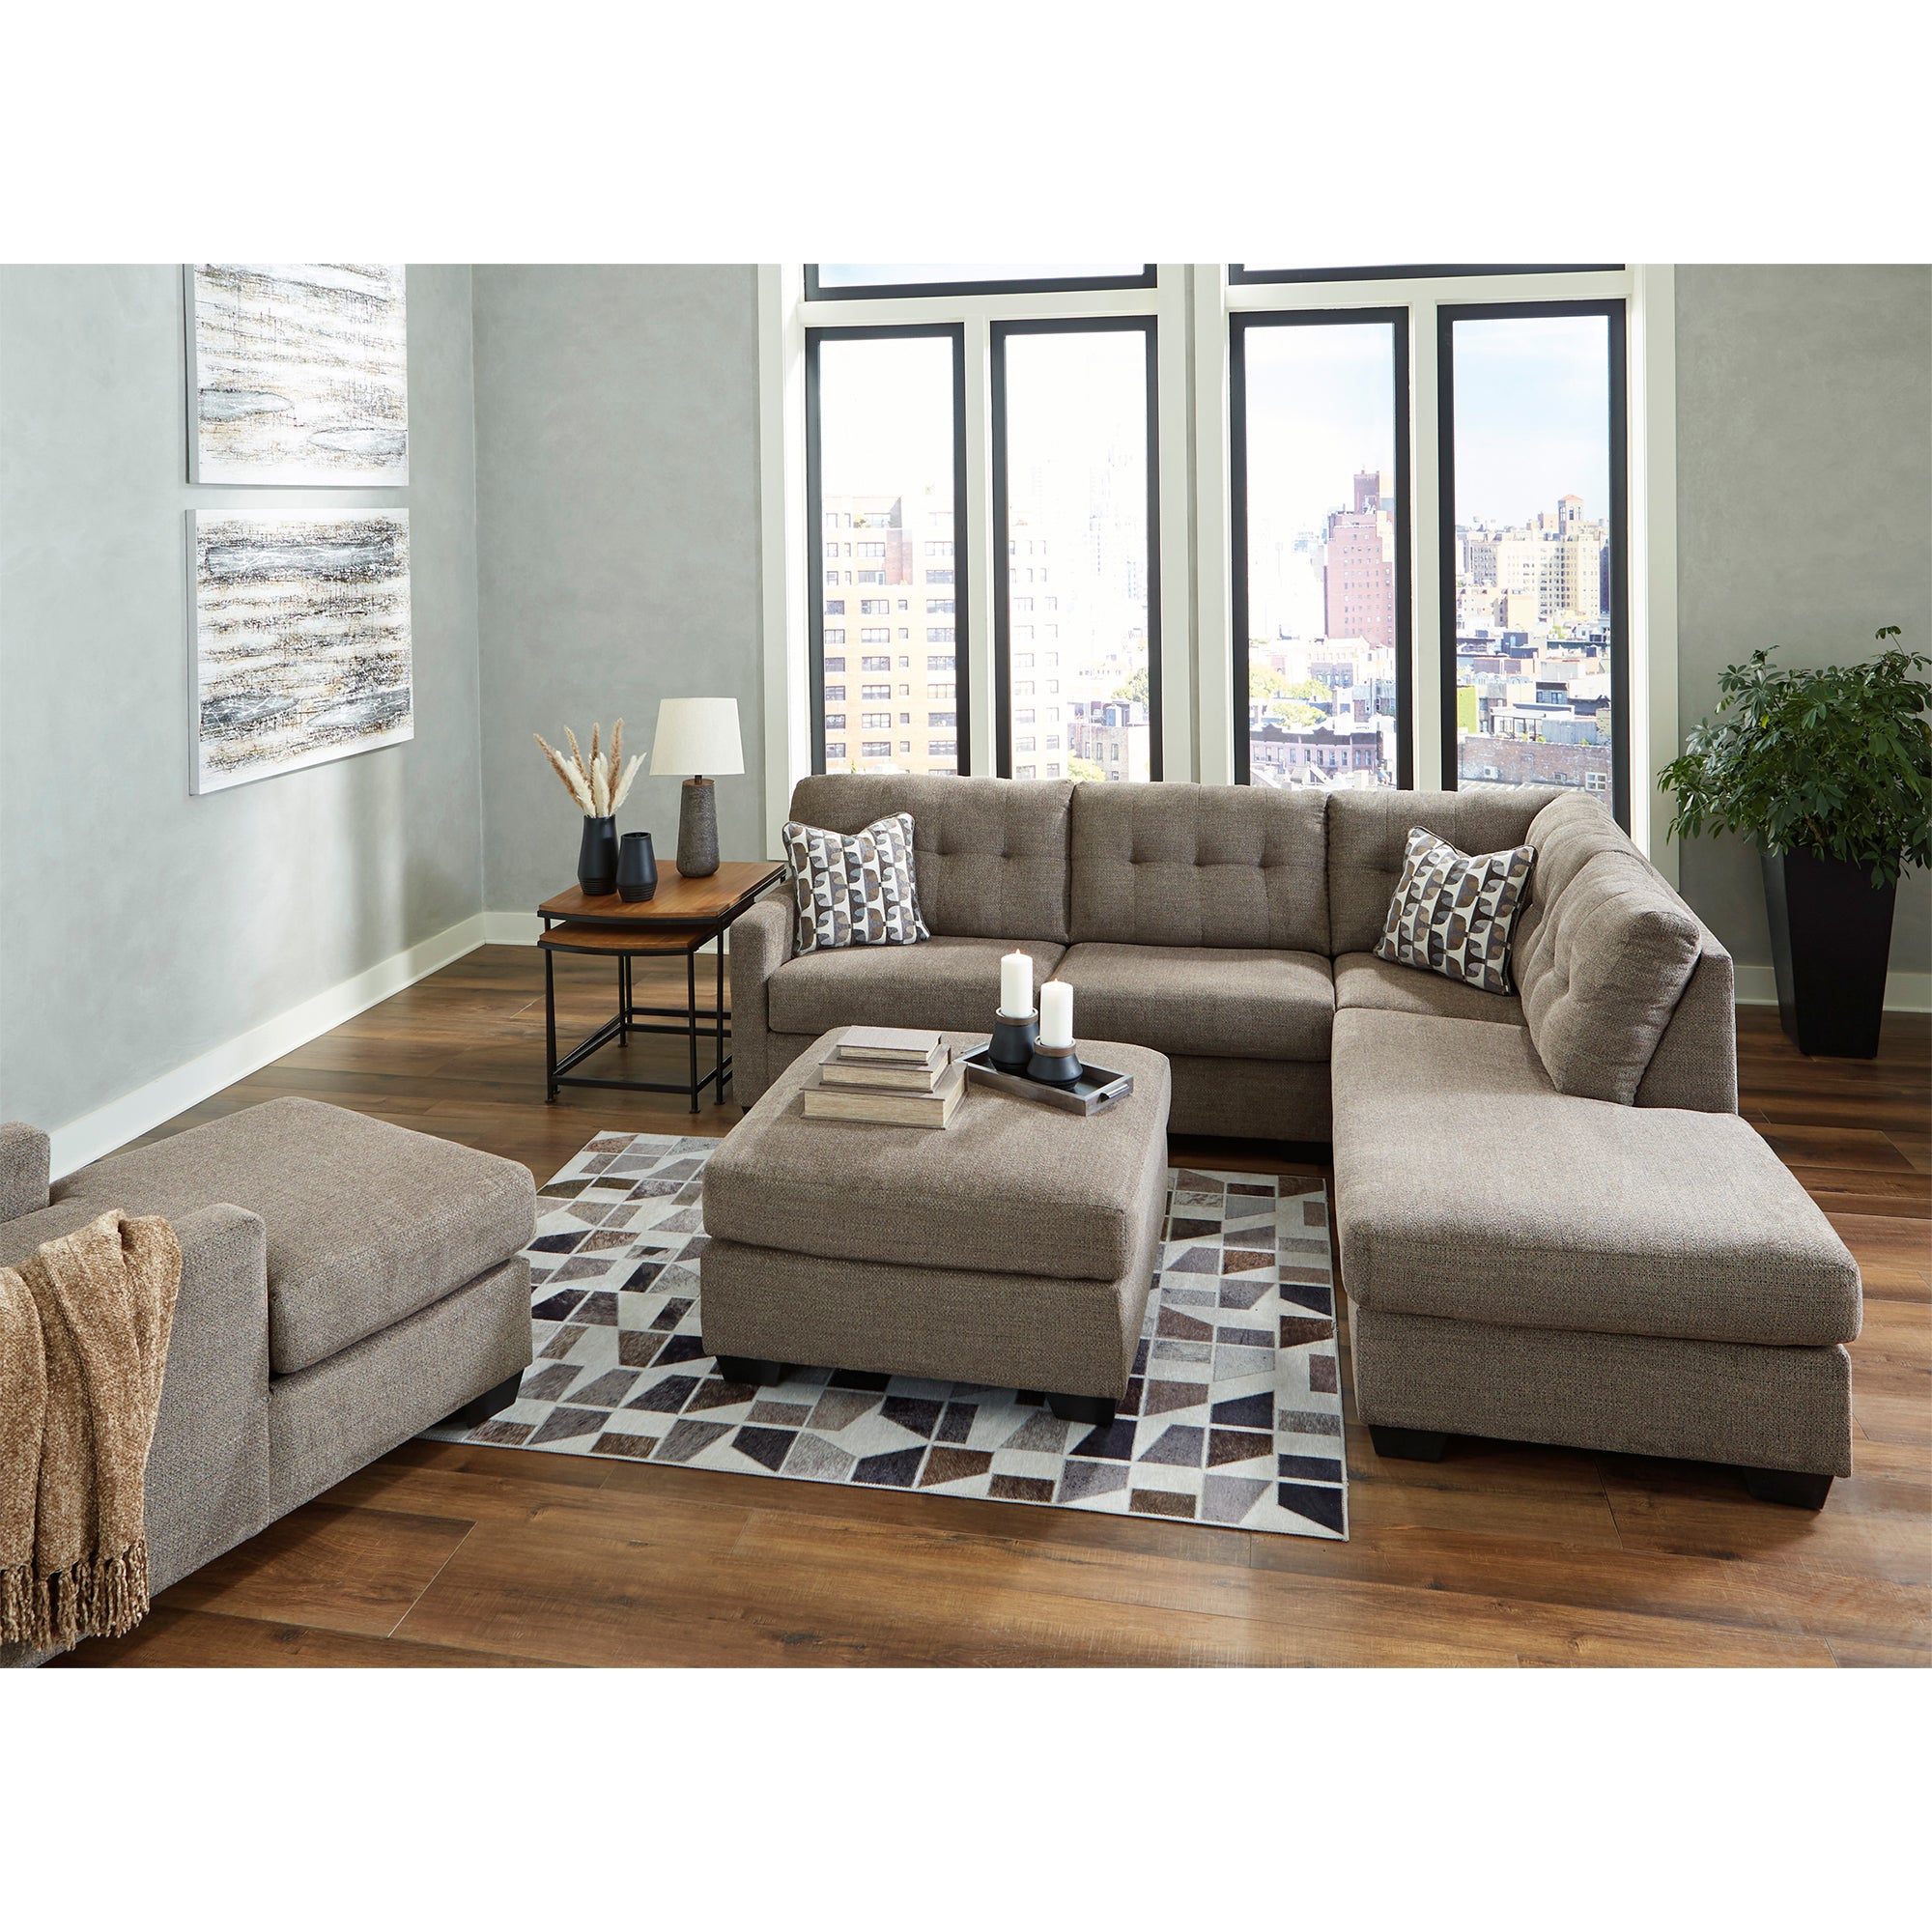 Sleek Mahoney Sectional with Chaise in chocolate, enhances the aesthetic of contemporary interiors